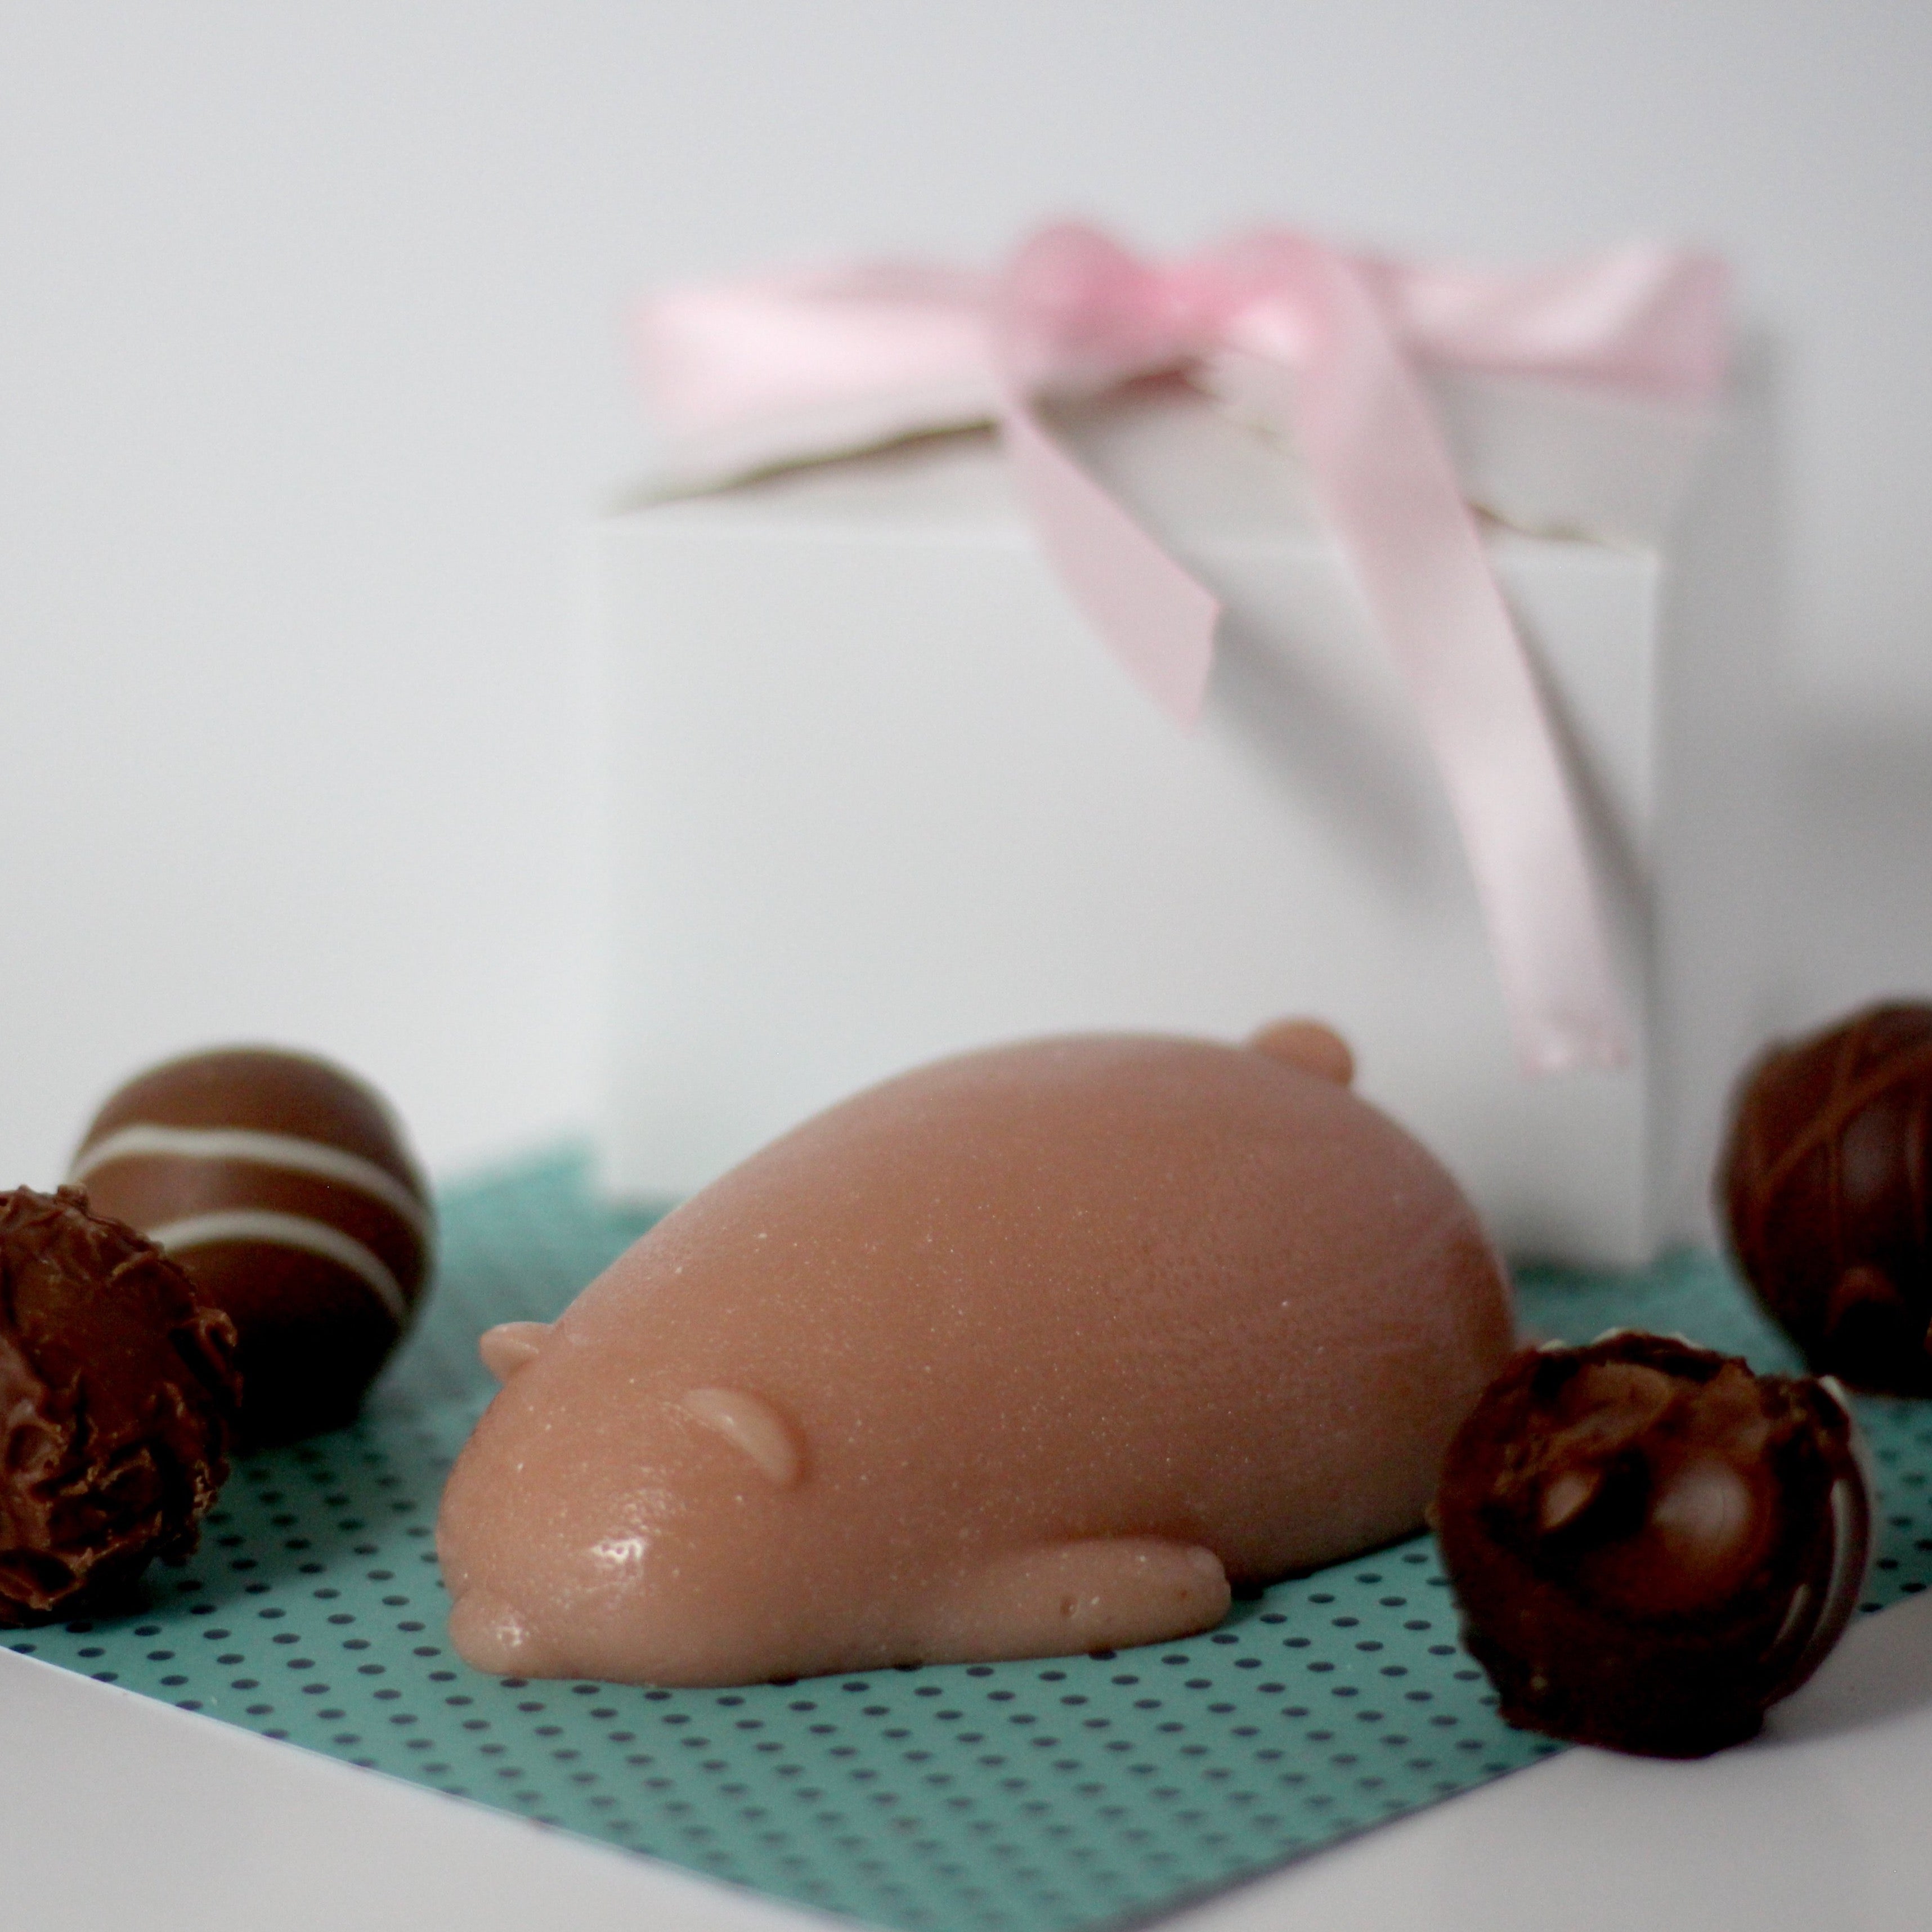 Chocolate Bear Jelly Soap - Frolic Creations - Soap - Cute Self Care - Kawaii Atheistic - Quirky Gift - Gift For Her